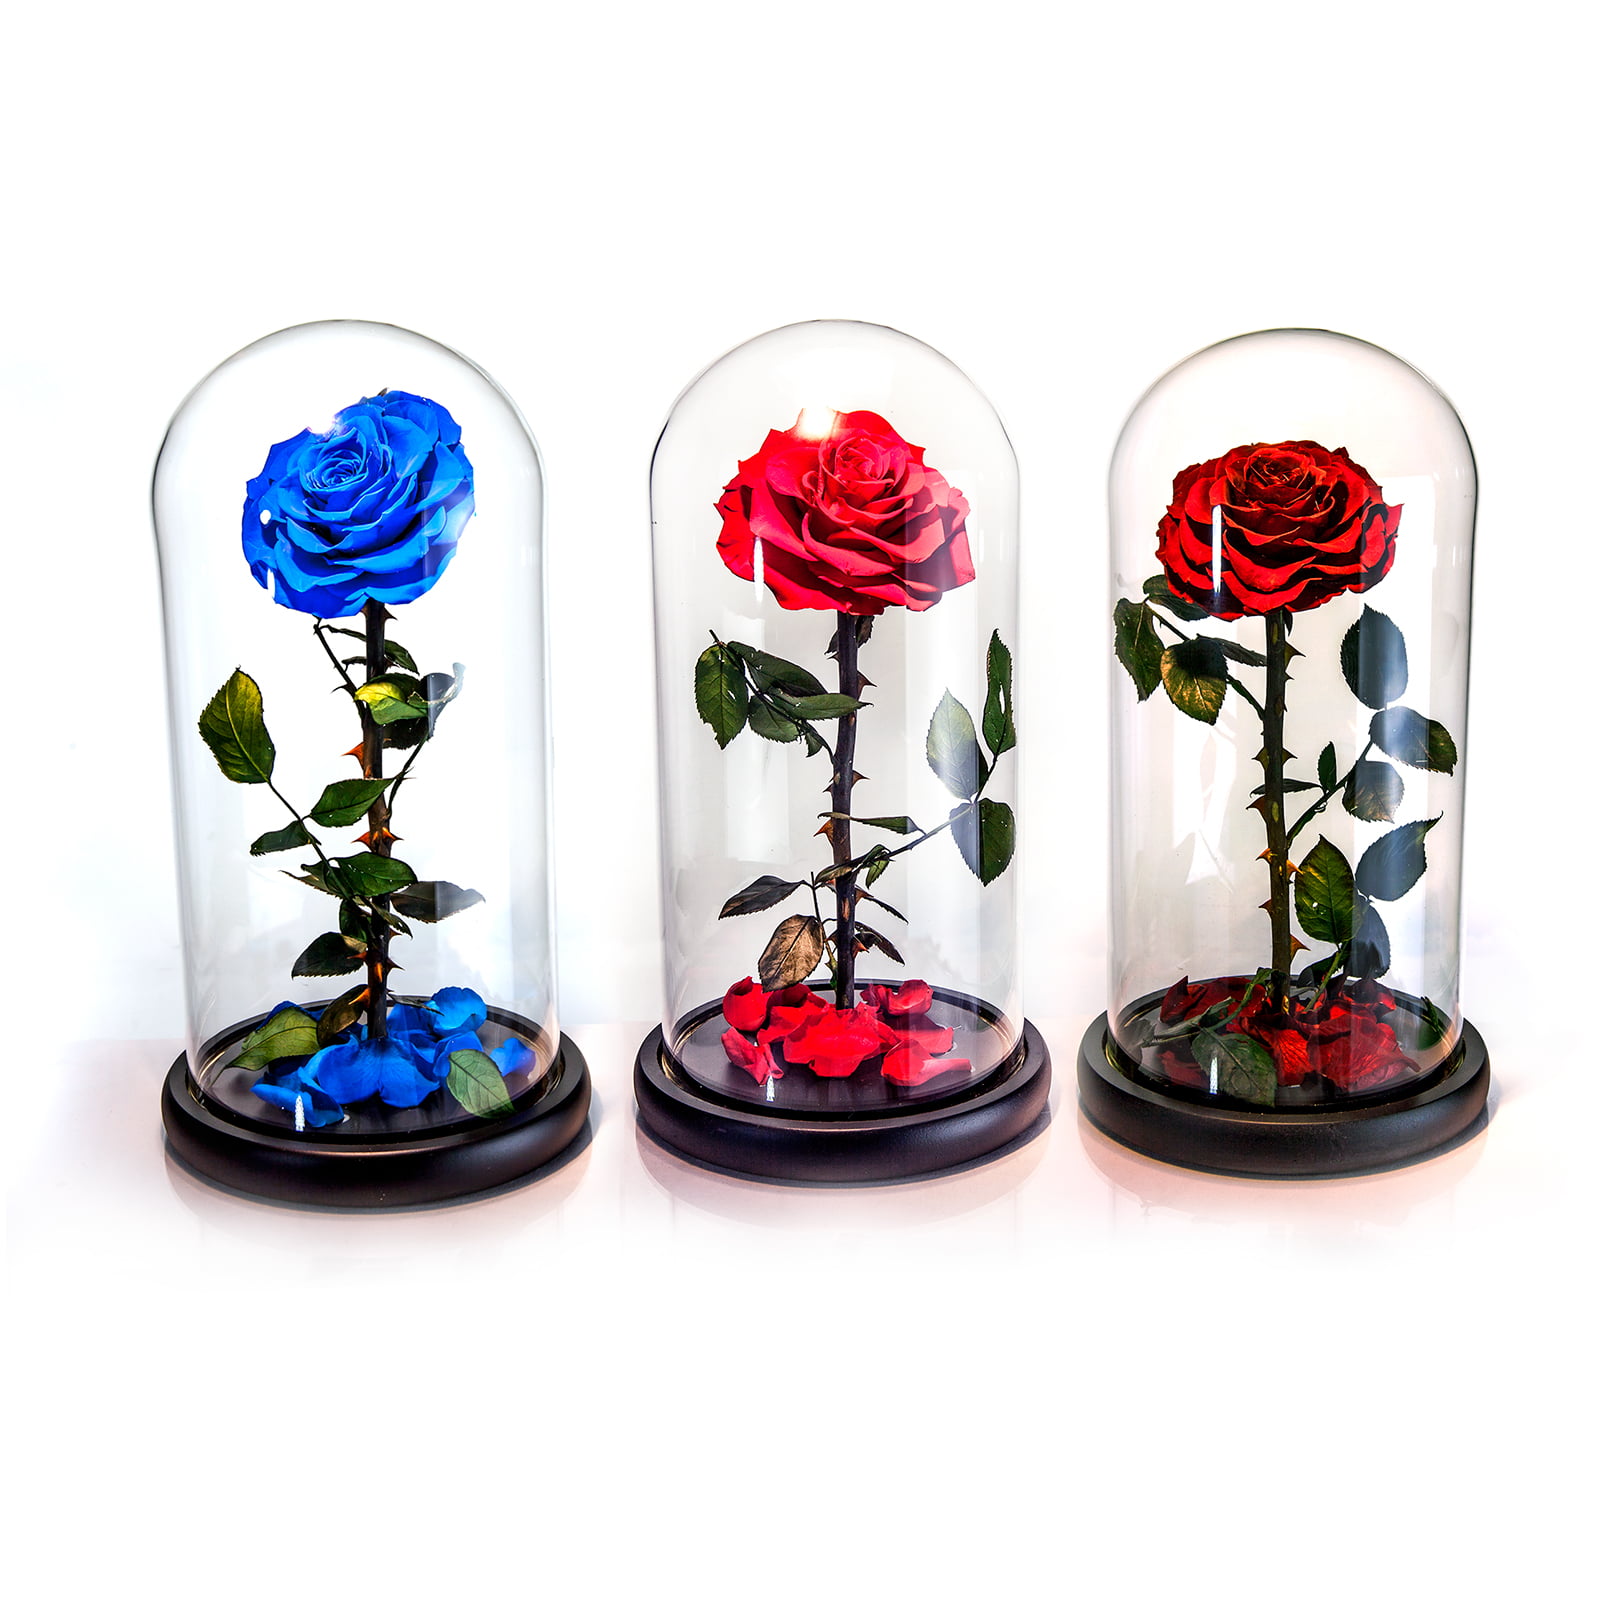 Eternal Rose of Wrought Iron Beauty and the Beast with fallen red petals and in glass dome on wooden base 